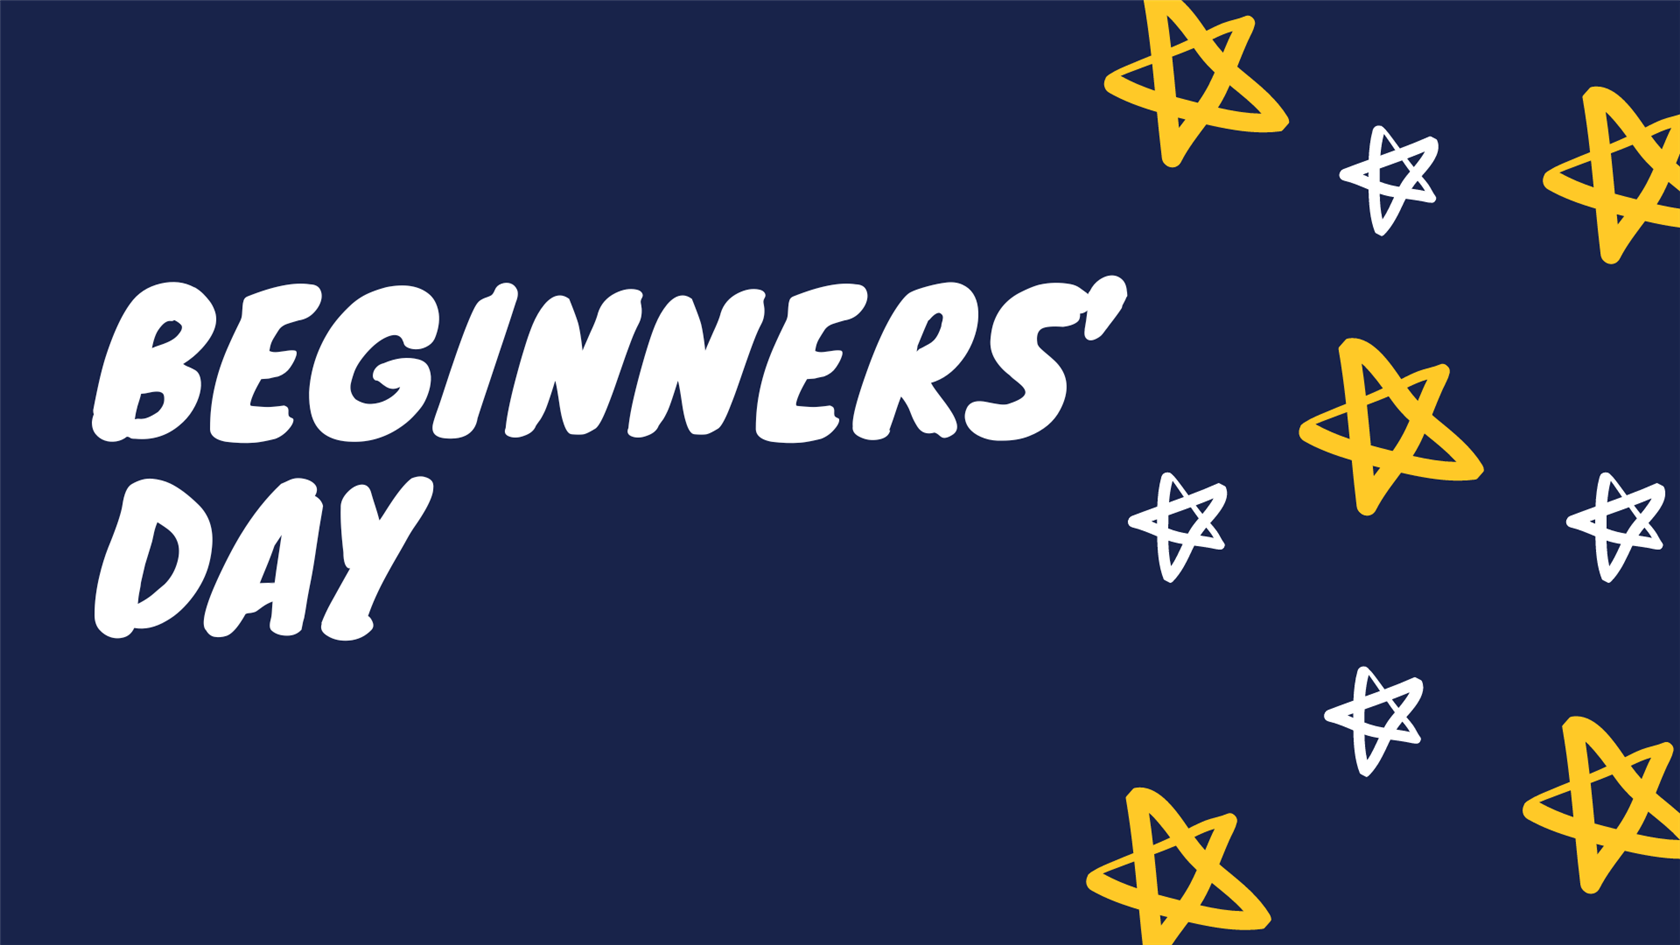  navy background hand drawn looking stars and Beginners' Day in white font